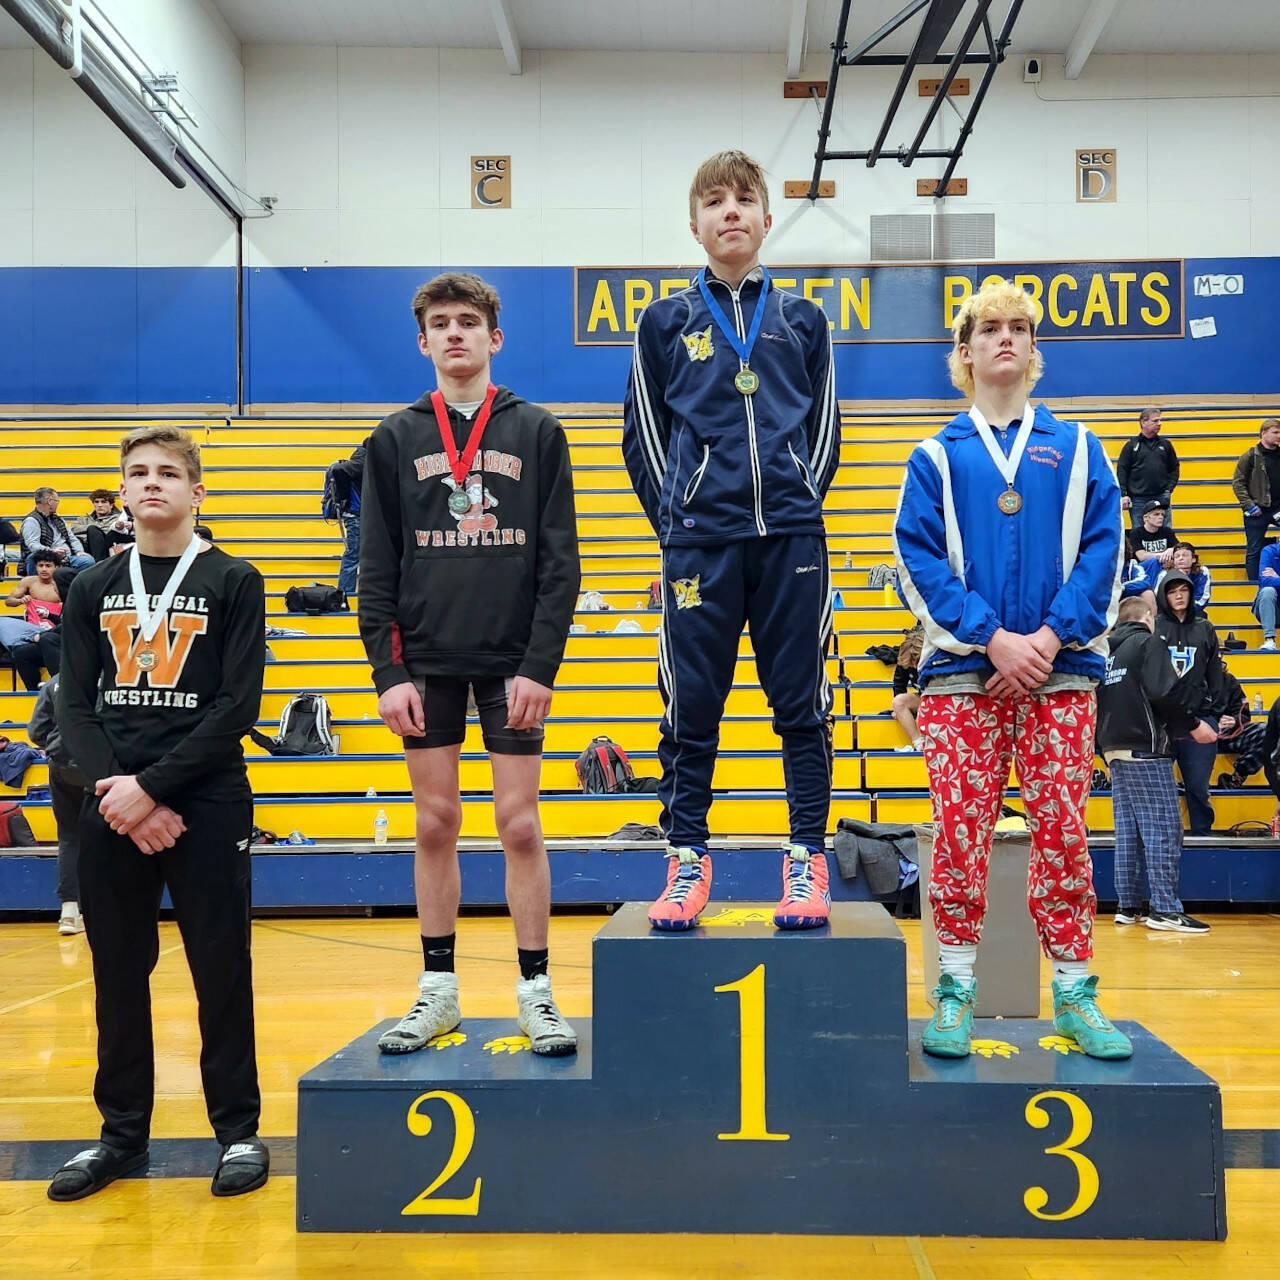 SUBMITTED PHOTO Aberdeen’s Mikey Hatton (1) stands atop the podium after winning the 126-pound championship at the 2A Region 3 Championships on Saturday in Aberdeen.